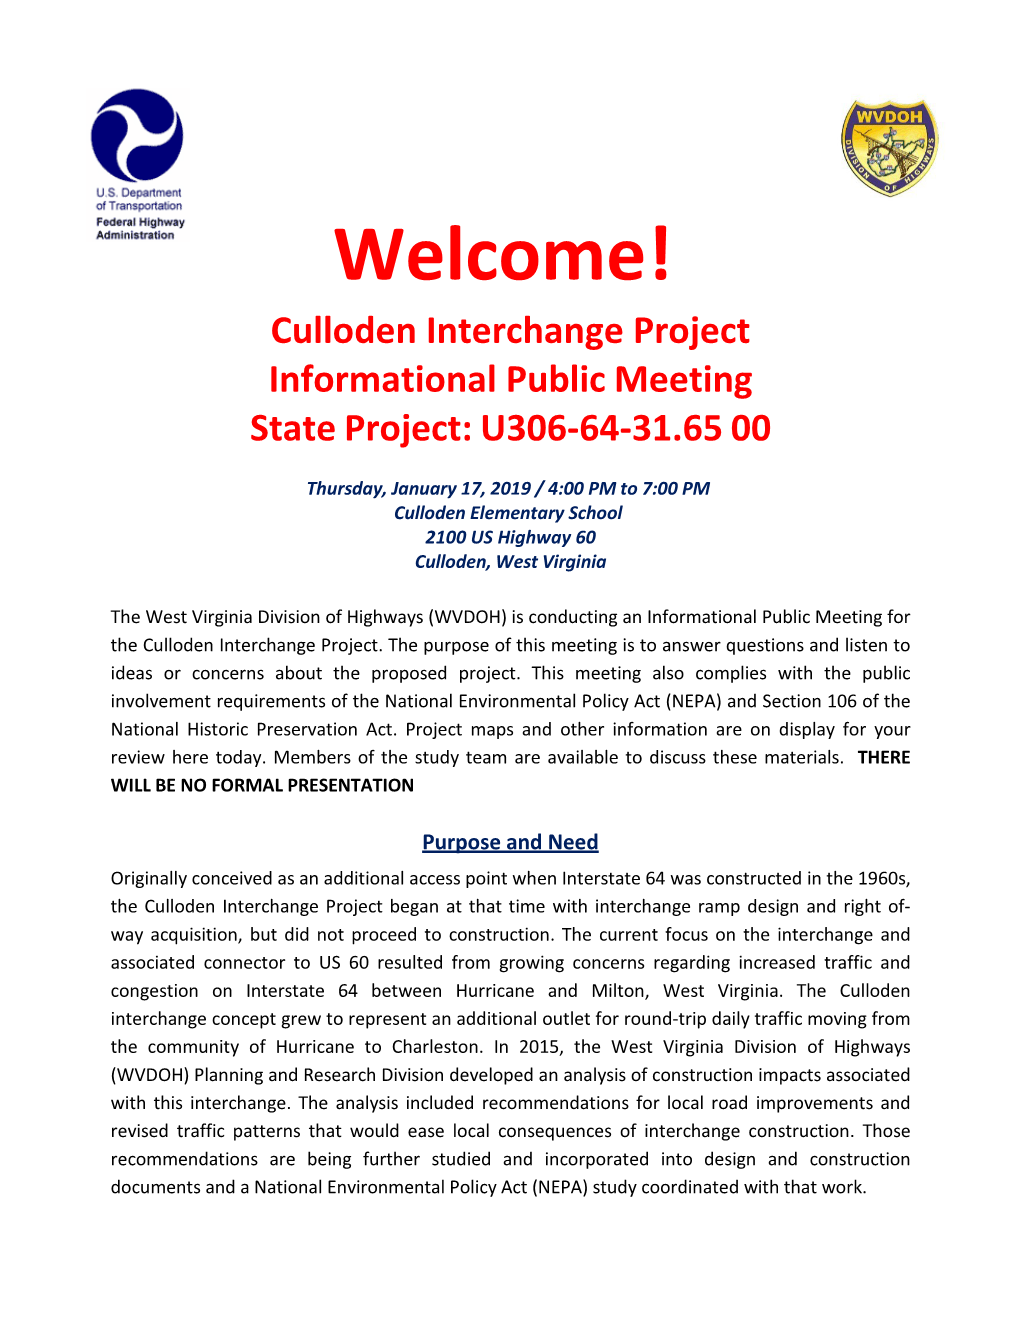 Culloden Interchange Project Informational Public Meeting State Project: U306-64-31.65 00